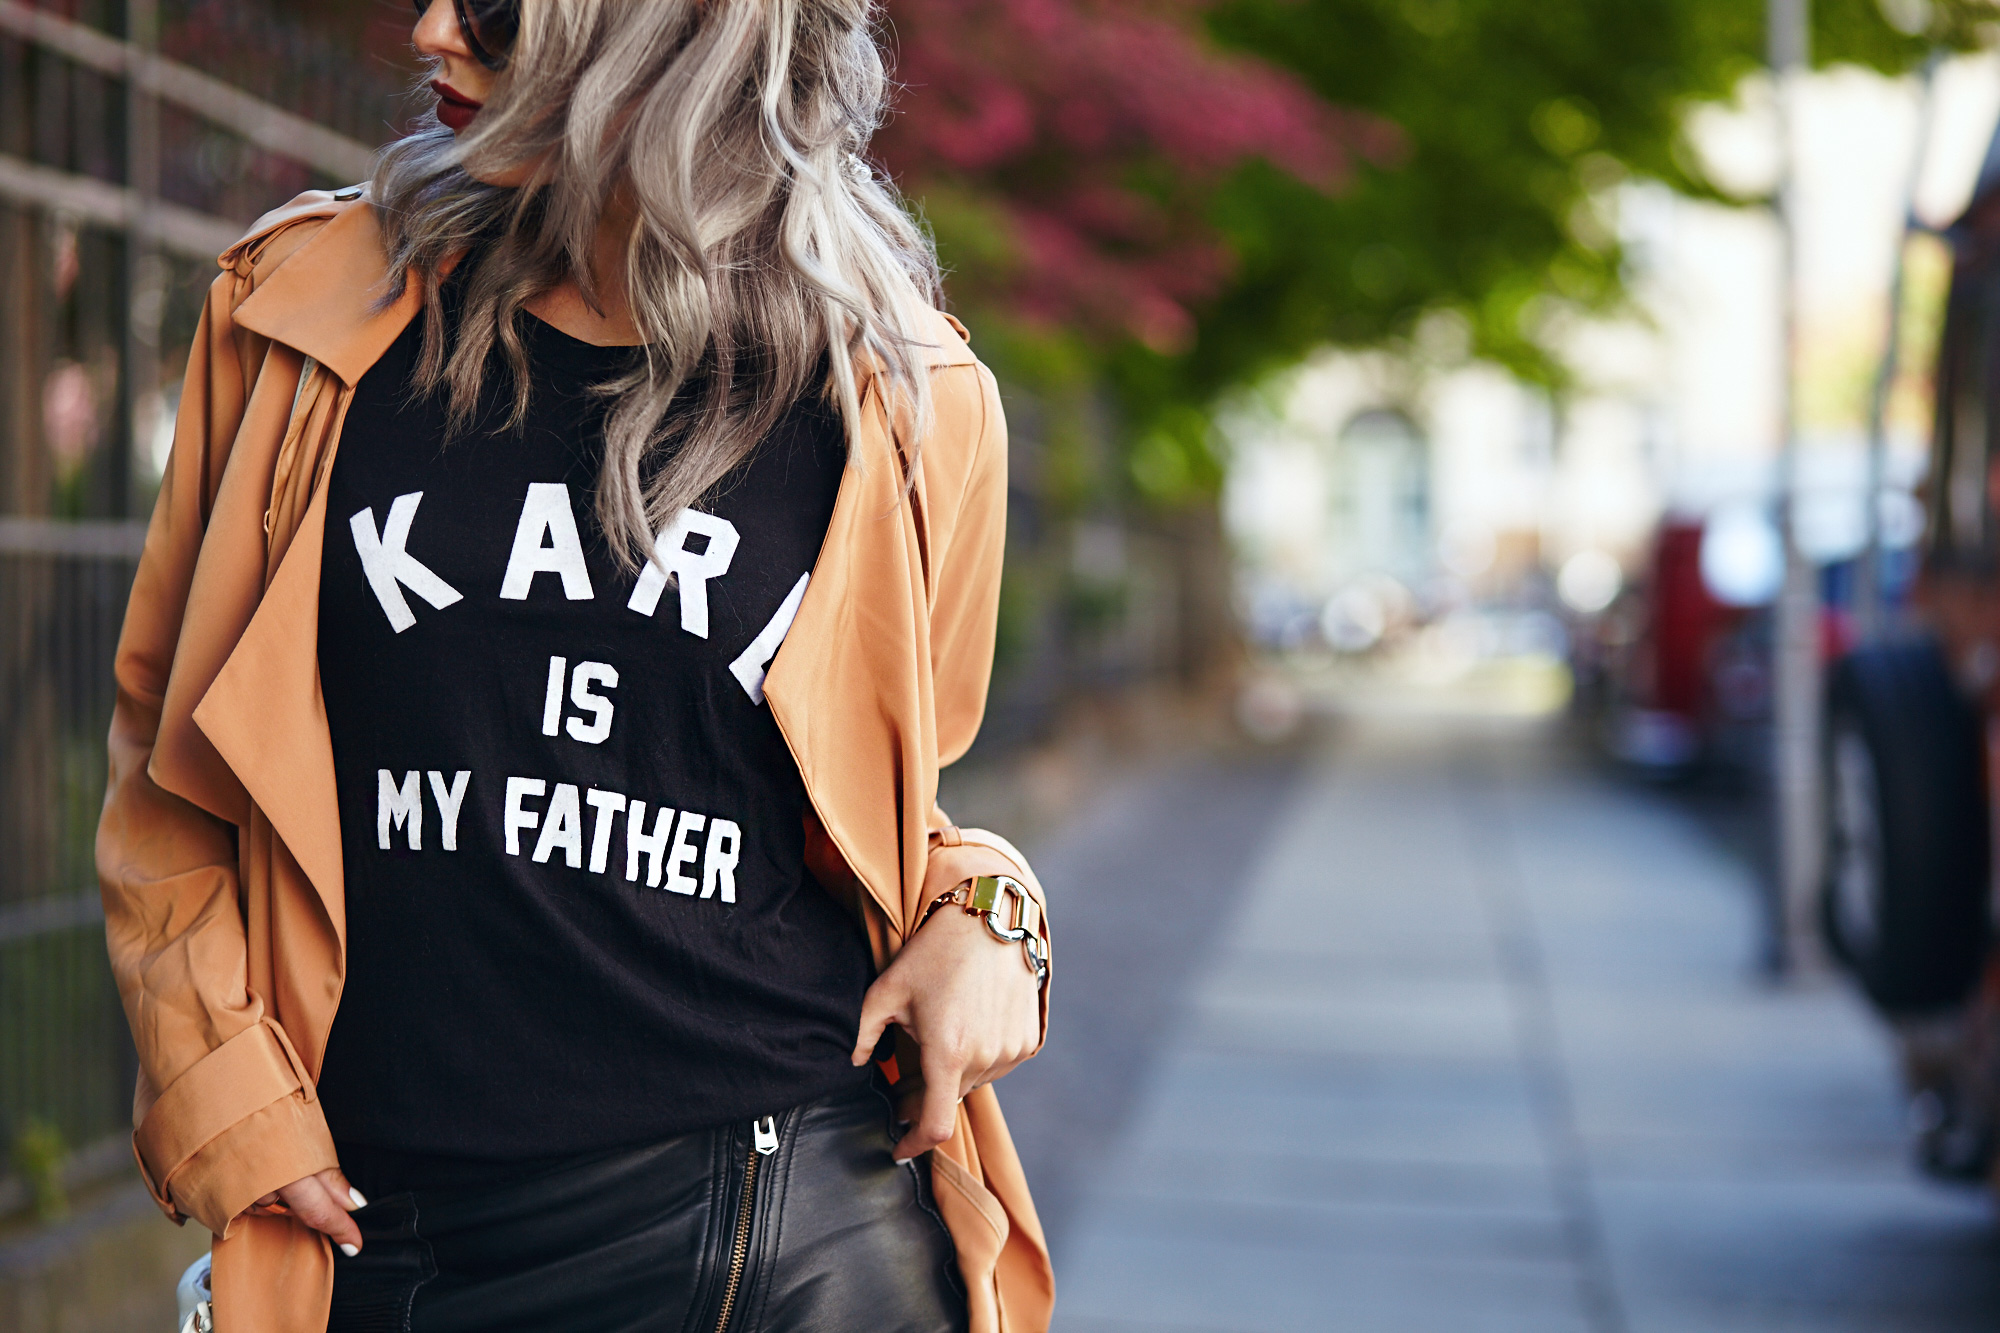 karl is my father shirt eleven paris casual effordless outfit trenchcoat beige